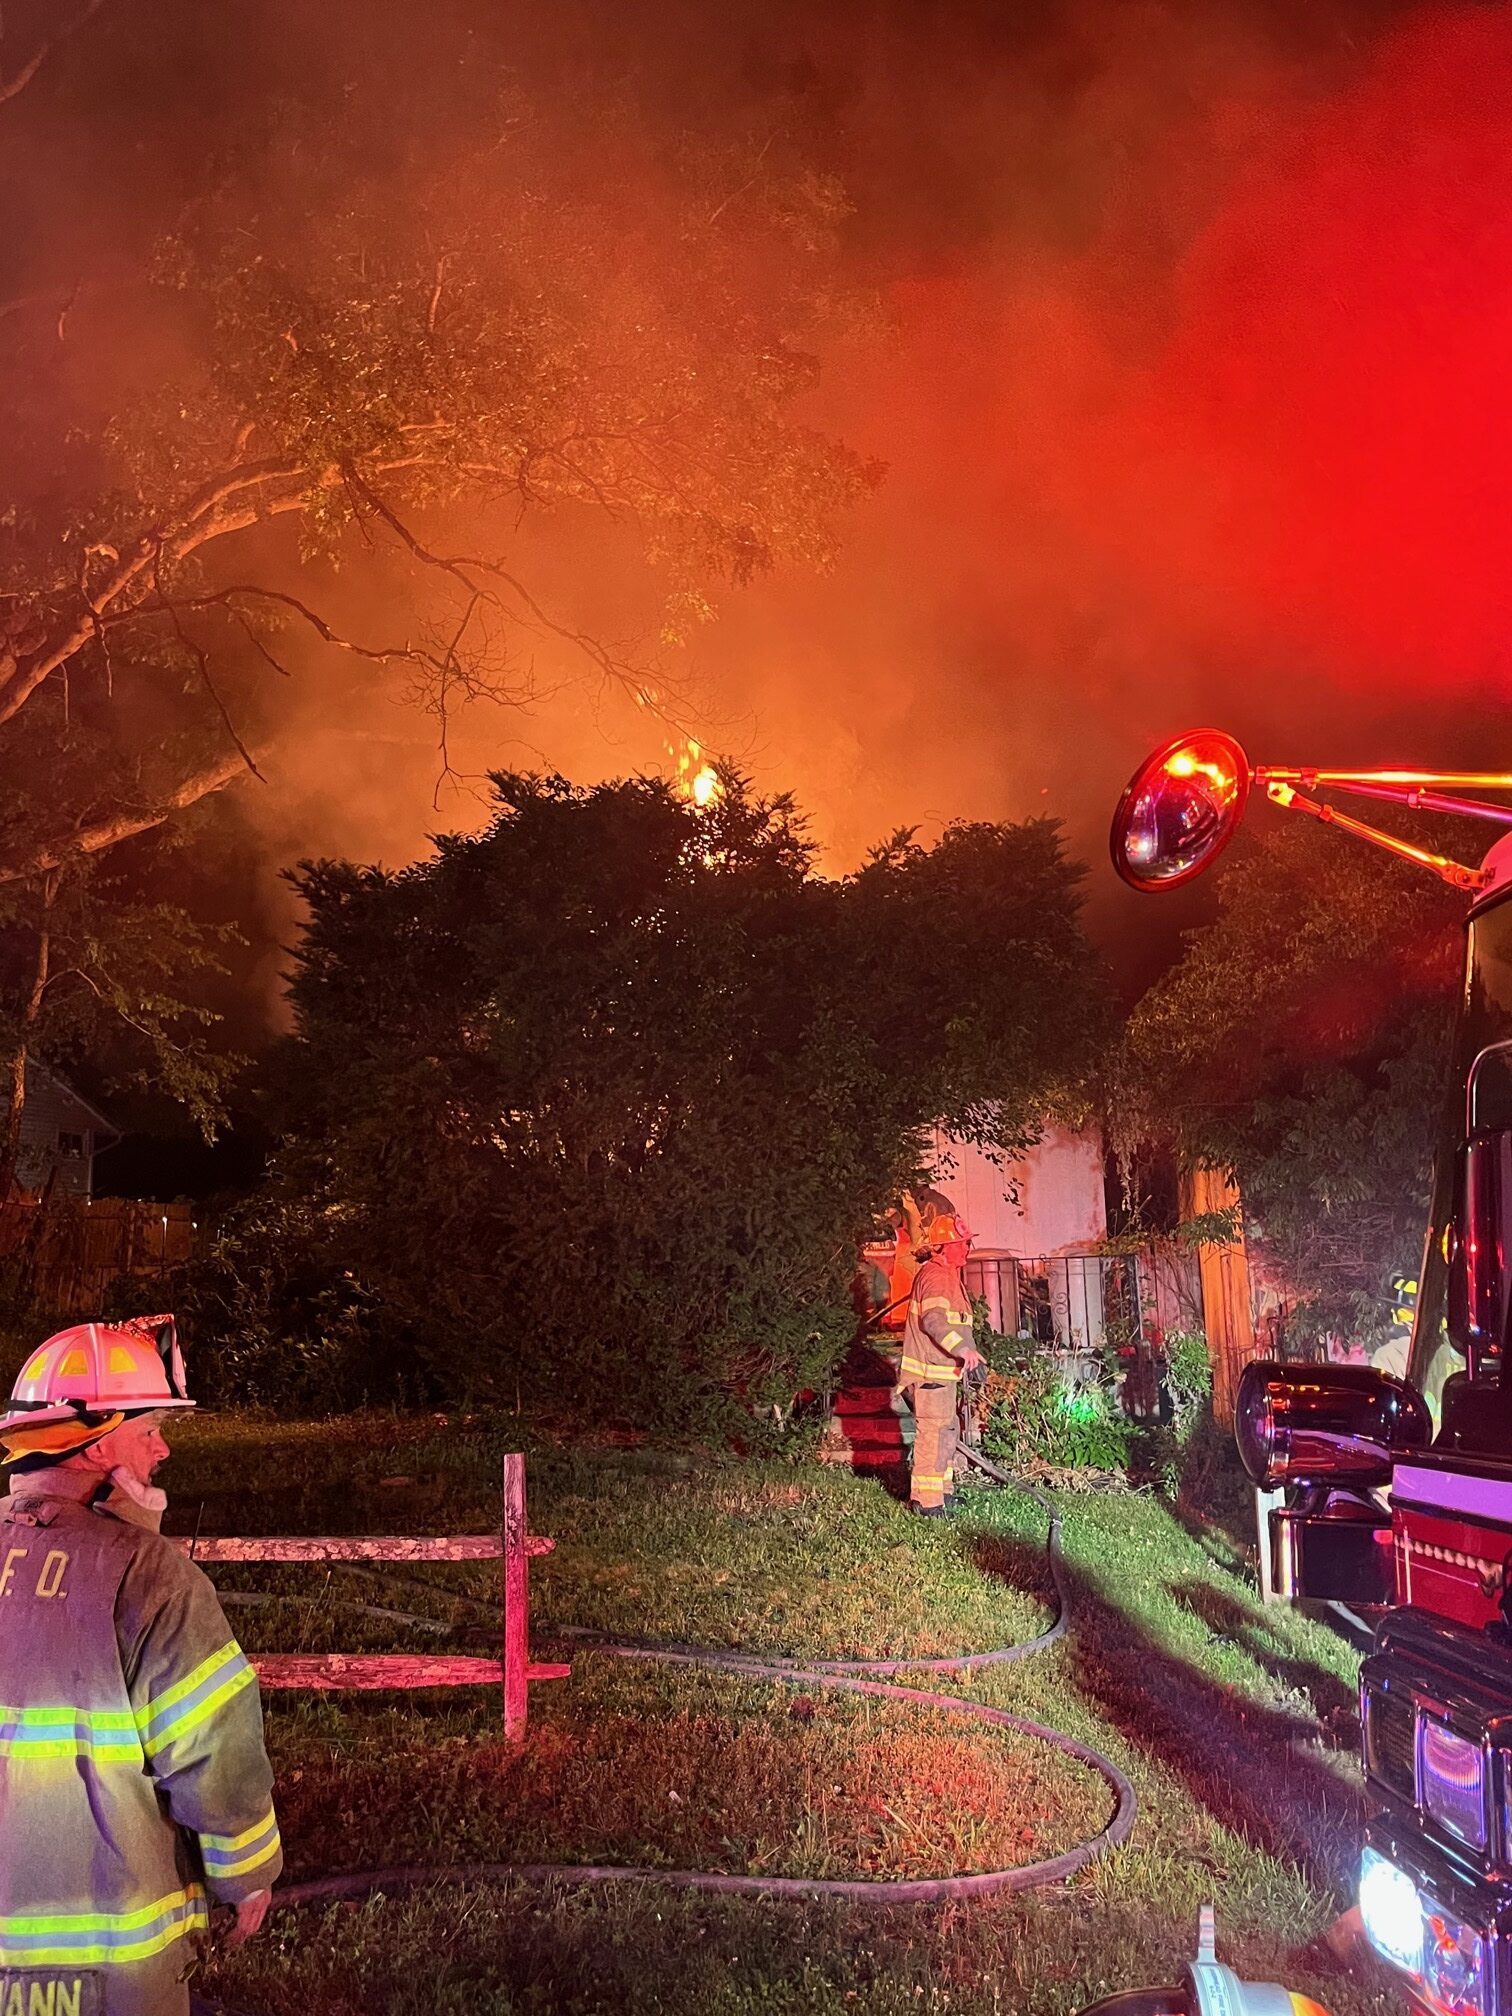 Firefighters battled a house fire on Wildwood Trail in Northampton on June 14. COURTESY RIVERHEAD FIRE DEPARTMENT